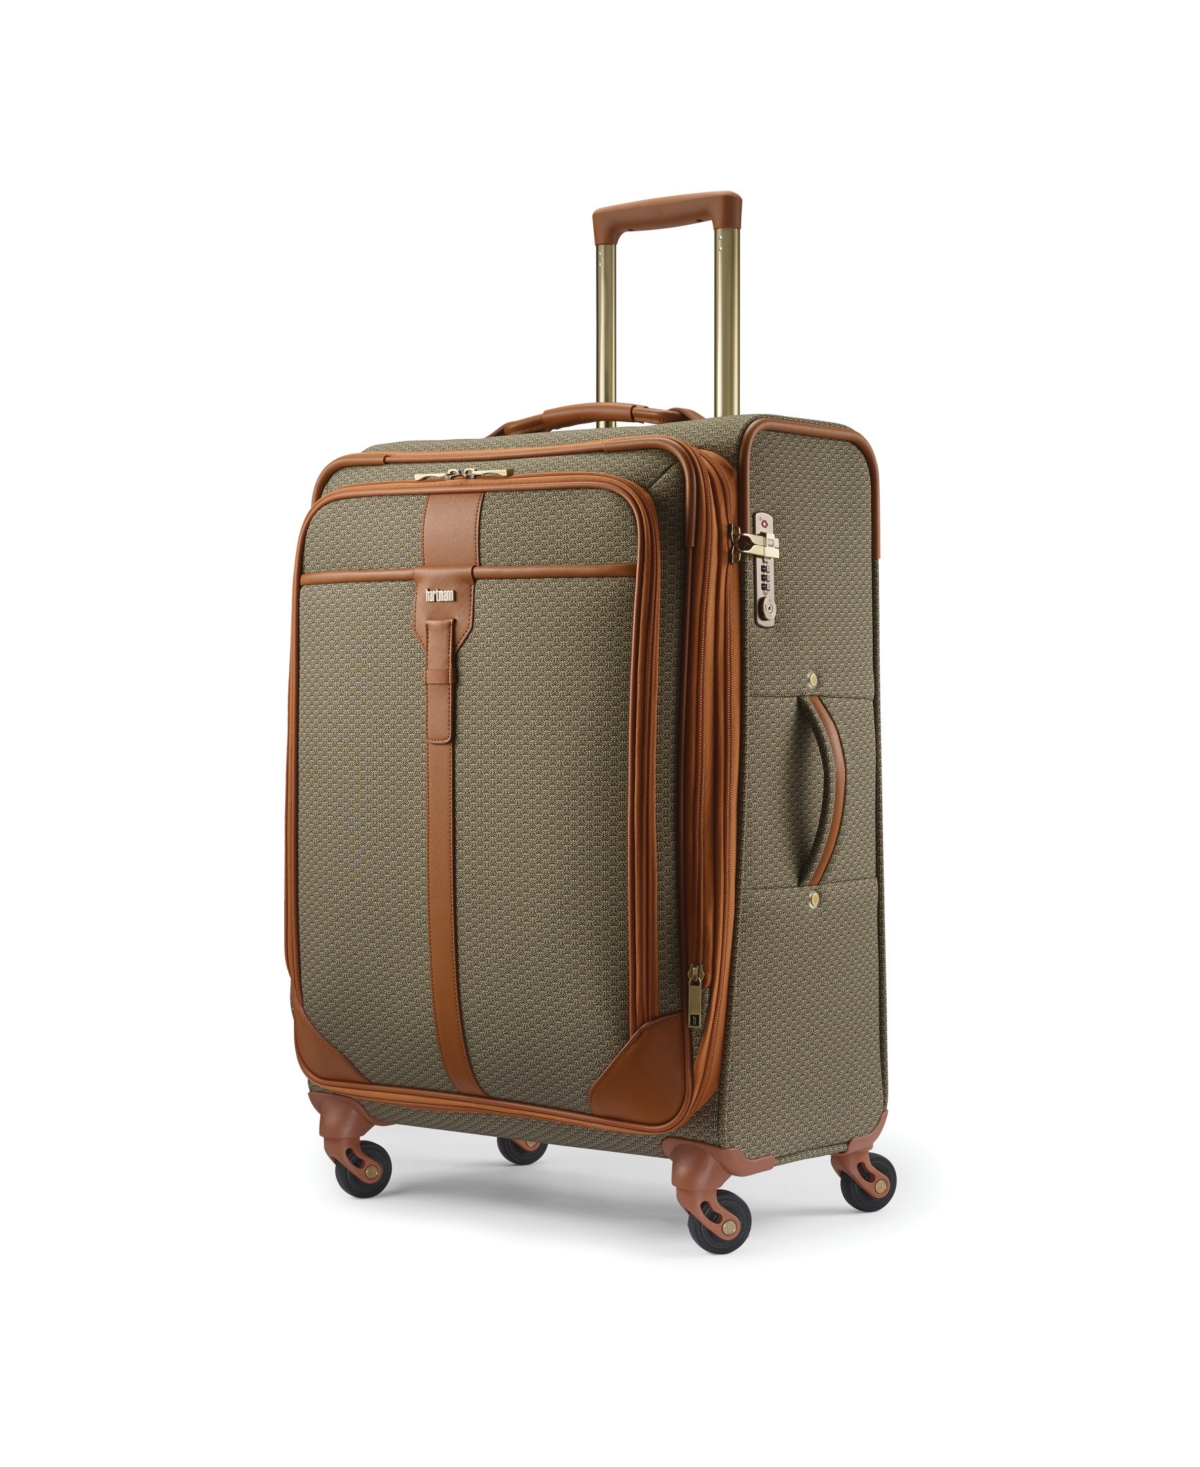 Luxe Ii Journey Expandable Spinner, Medium - Natural Tan